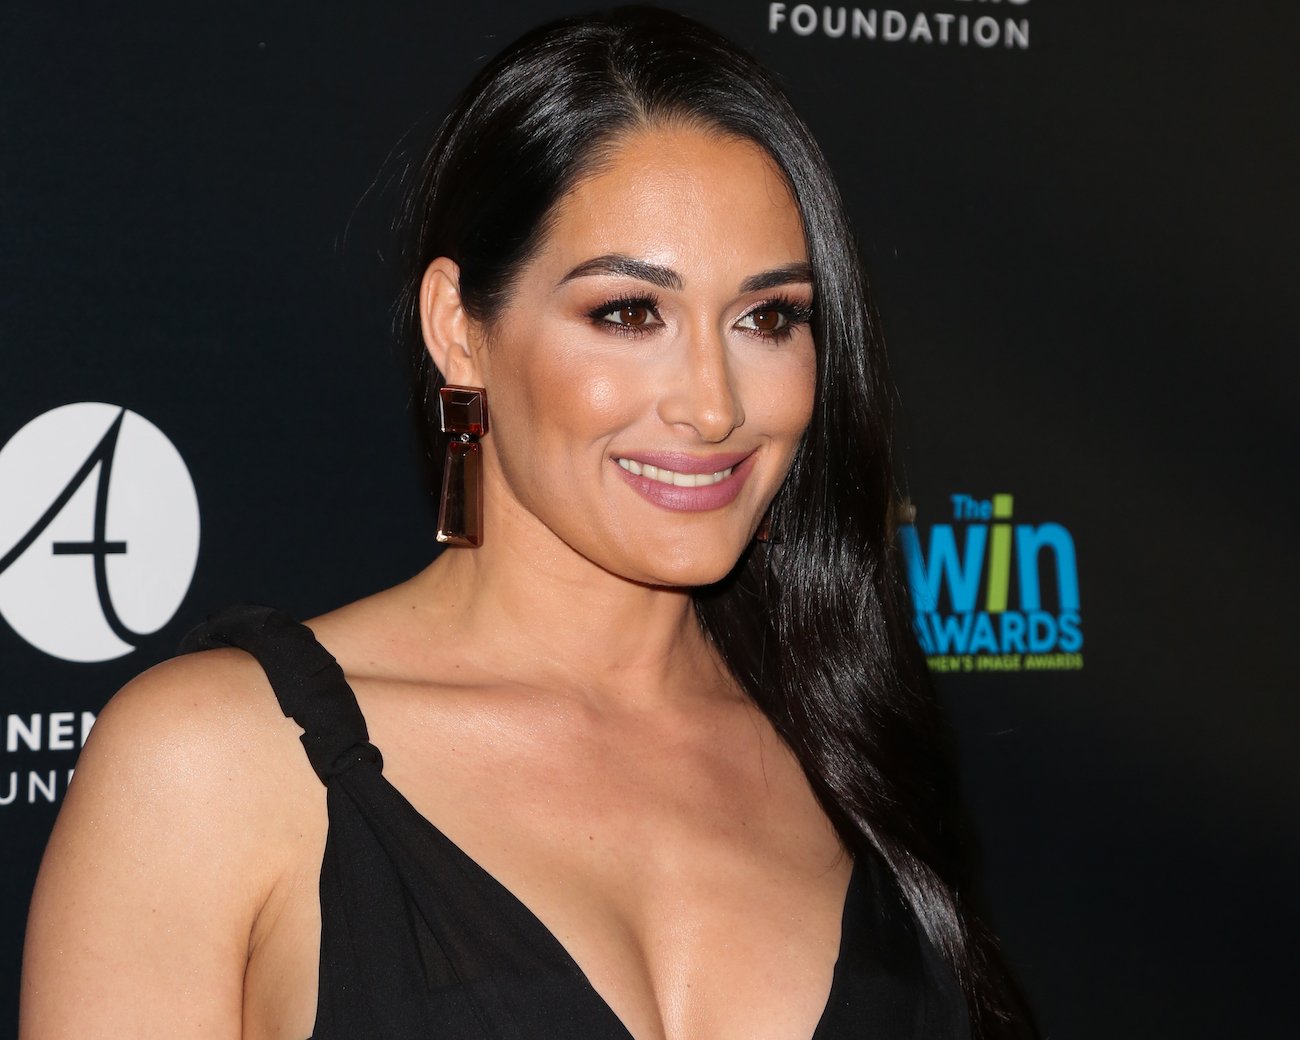 Nikki Bella attends the 20th Annual Women's Image Awards at the at Montage Beverly Hills